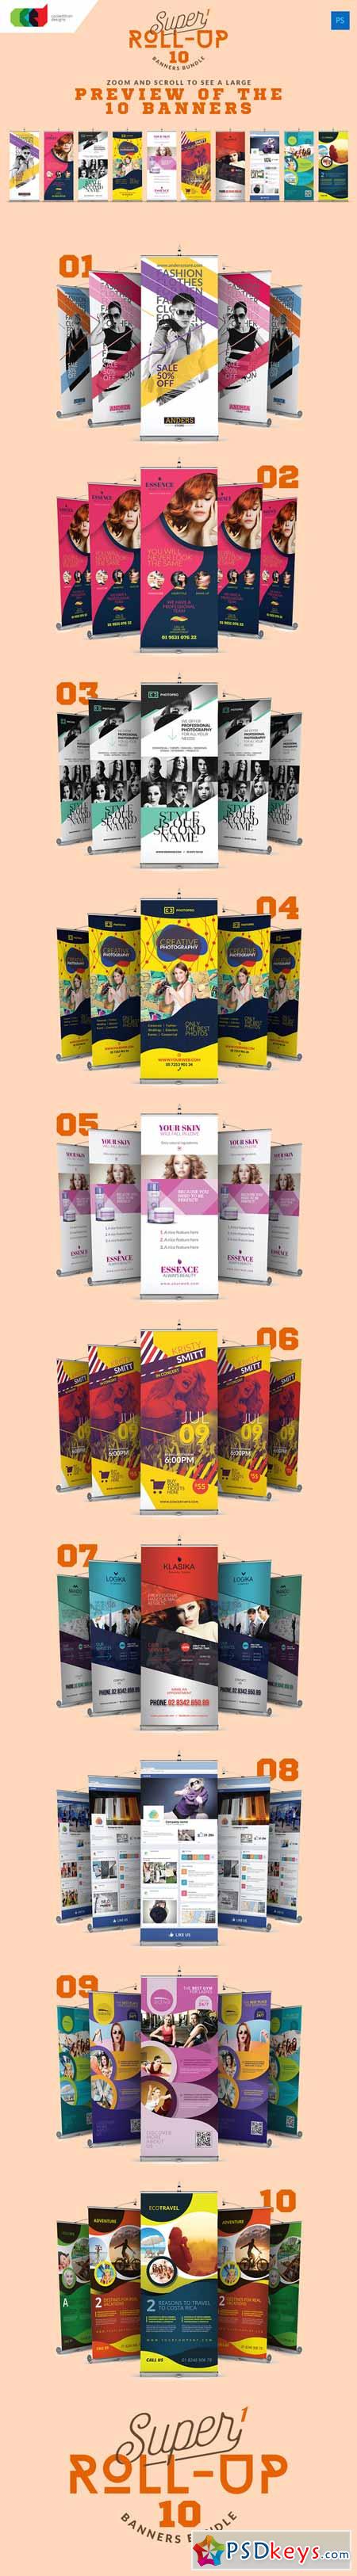 Super 1 - Roll-Up Banners Bundle 319531